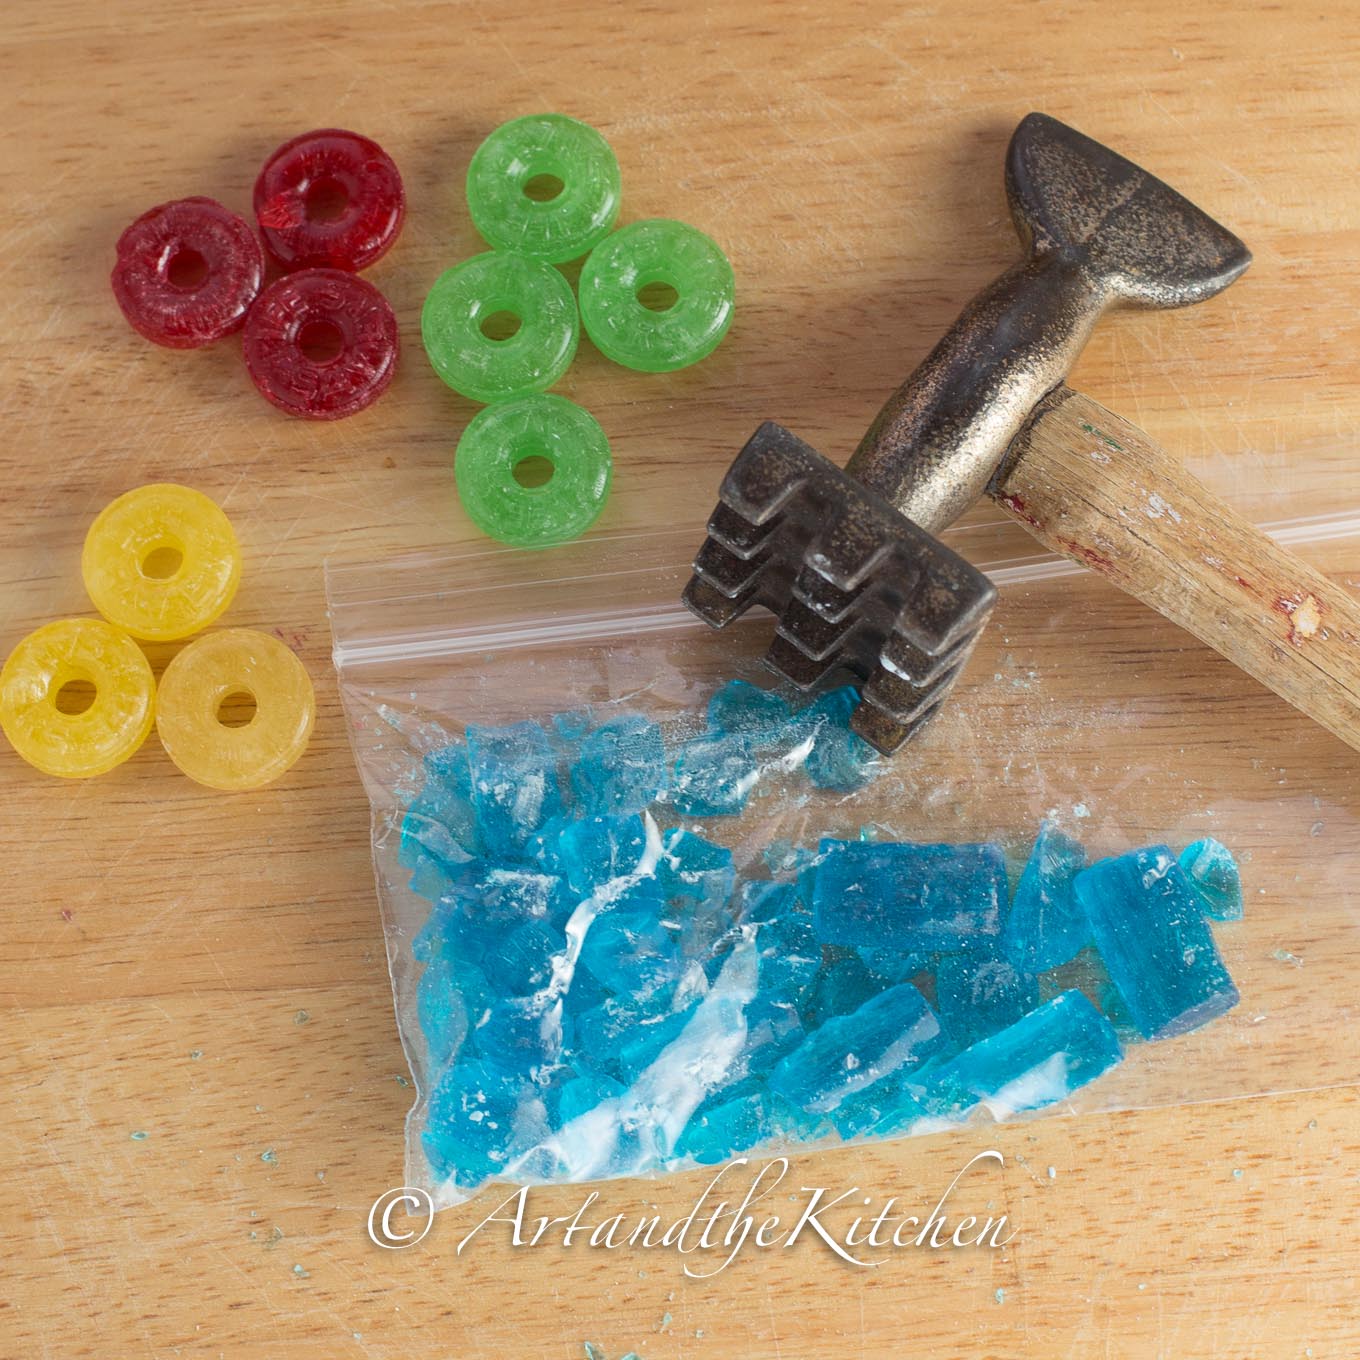 Colored hard candies and plastic bag filled with crushed blue candies with a meat mallet. 